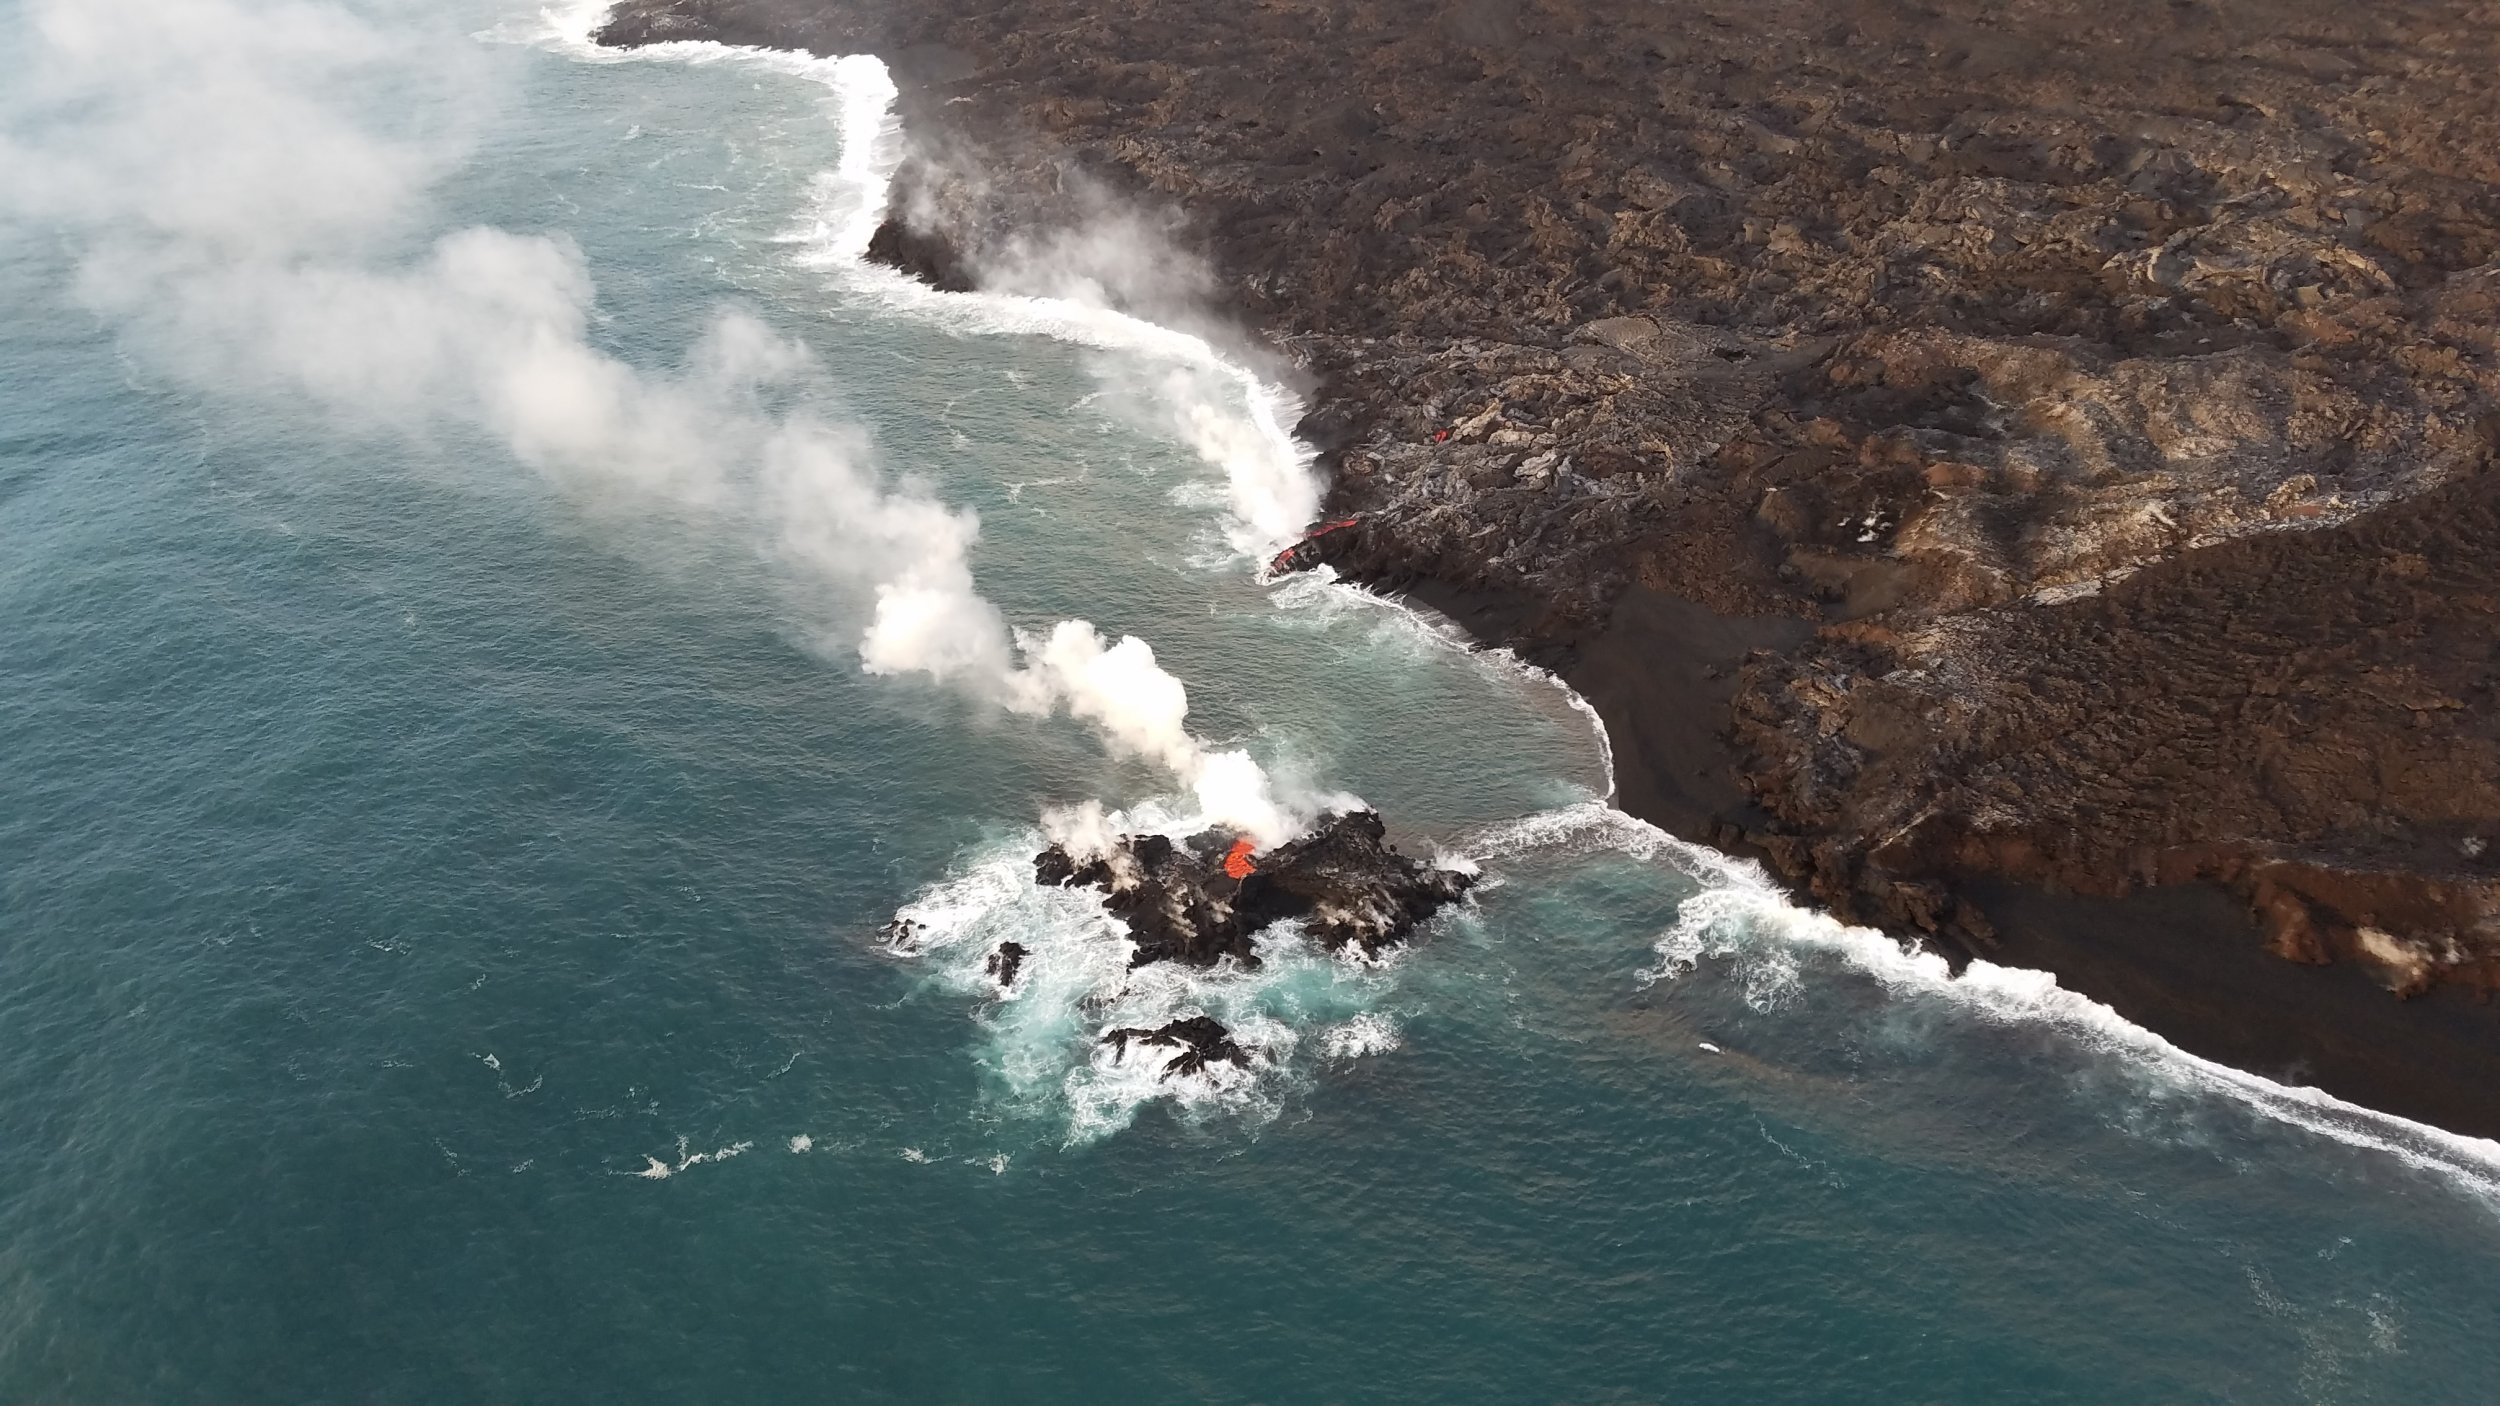 Hawaii Kilauea Volcano: Map, Pictures Show Coastline Before and After